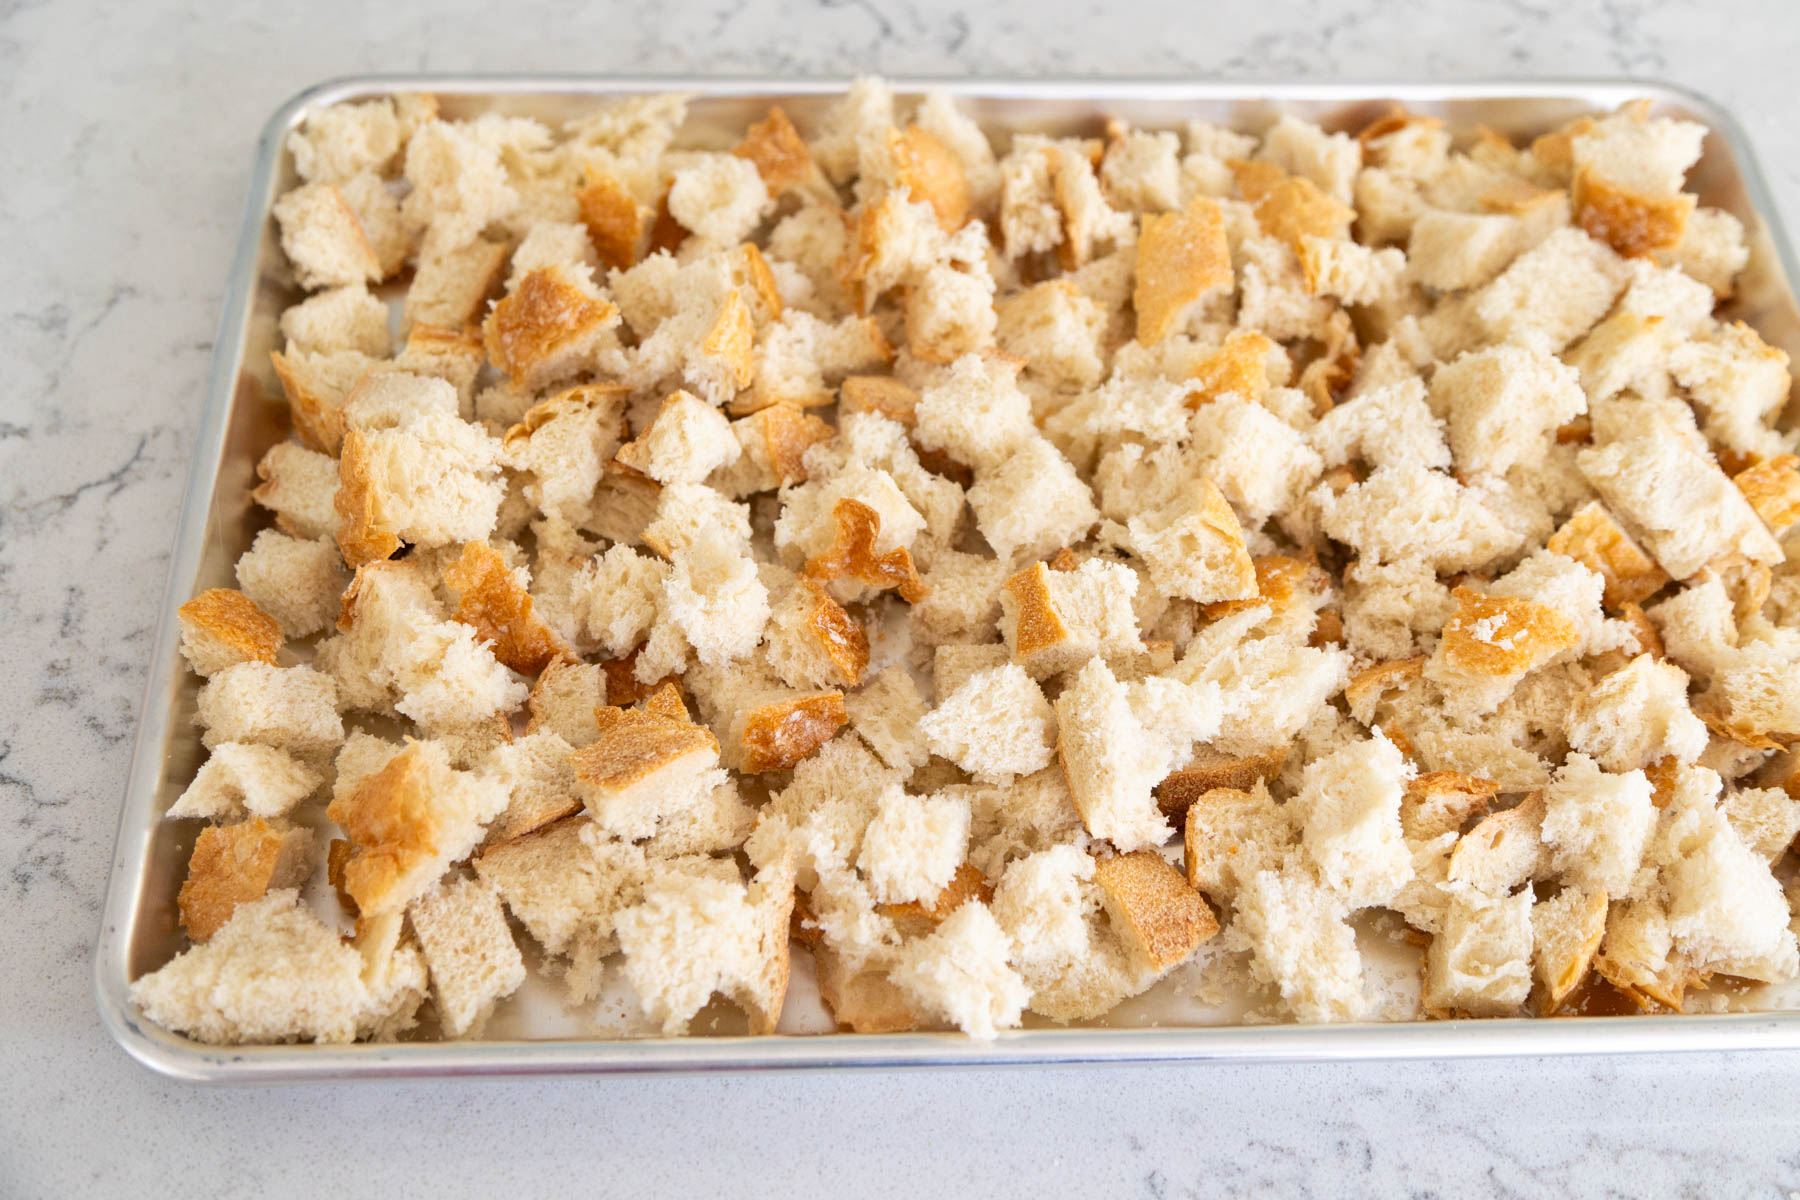 A large metal baking sheet is filled with hand ripped bread chunks to make homemade stuffing croutons in the oven.